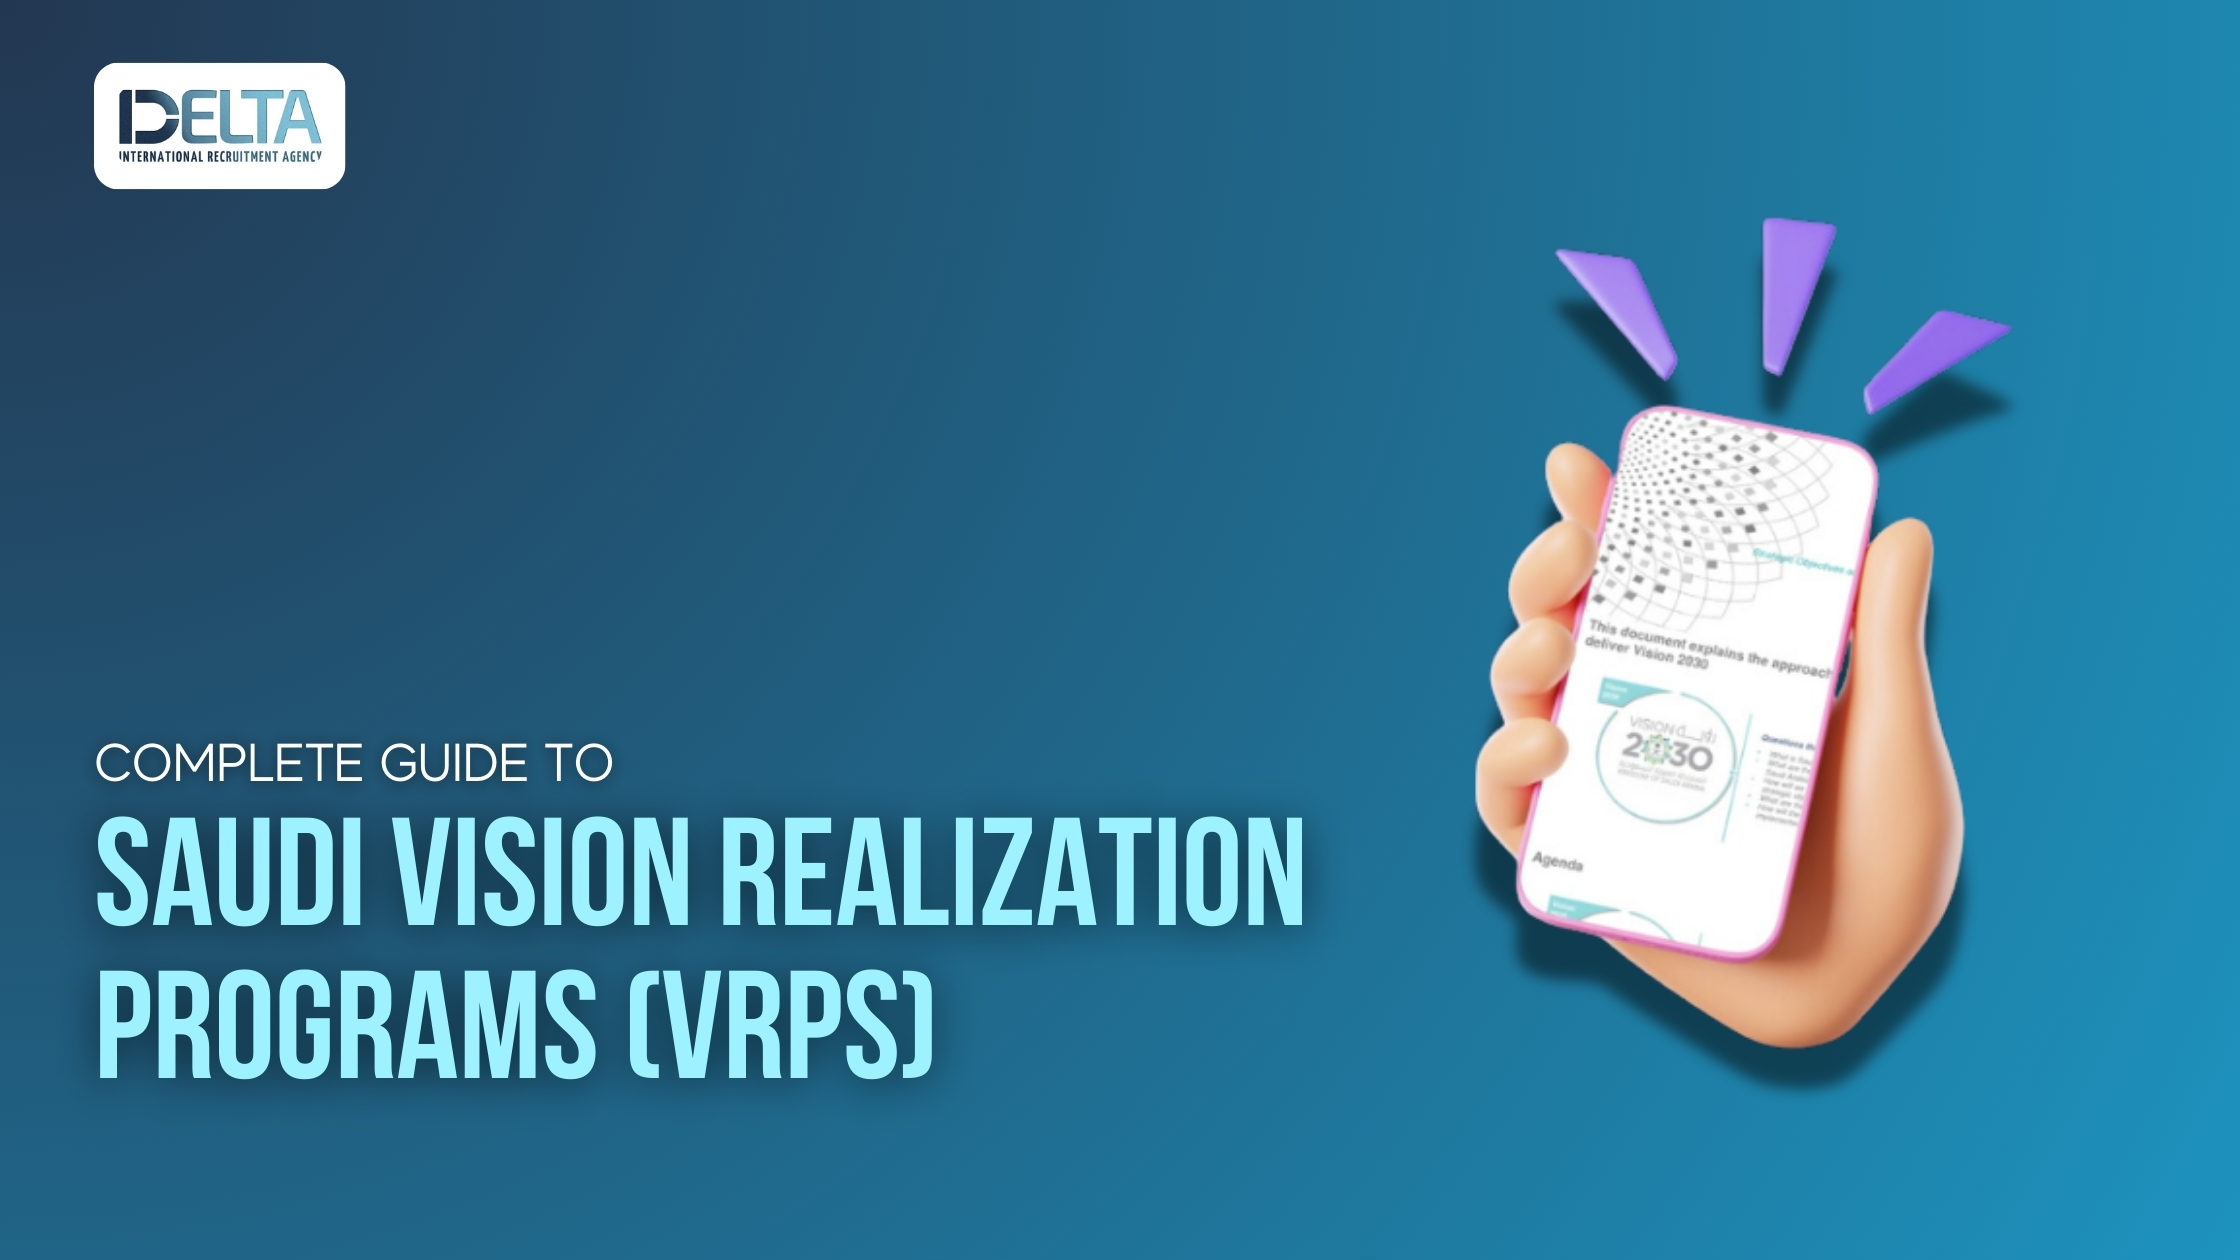 Complete Guide to Saudi Vision Realization Programs (VRPs) and How They Work